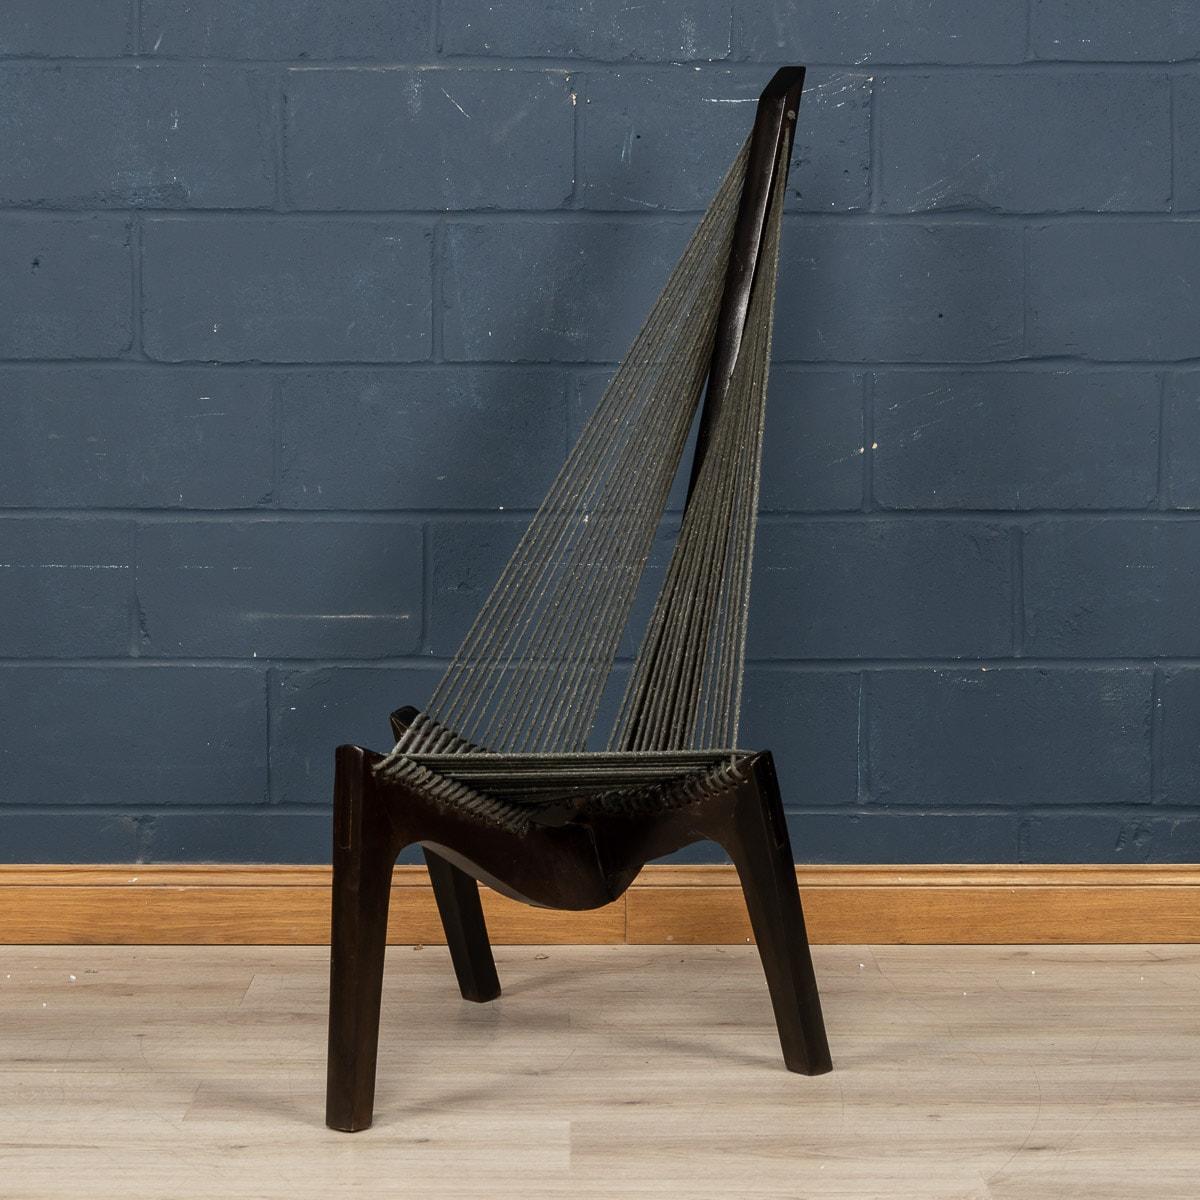 A nice vintage Harp chair designed by and attributable to Jorgen Hovelskov and manufactured by Christensen & Larsen, Mobelhadvaerk, Copenhagen in 1960s. Its unique form was inspired by a Viking ship bow section. The expertly crafted frame, in solid